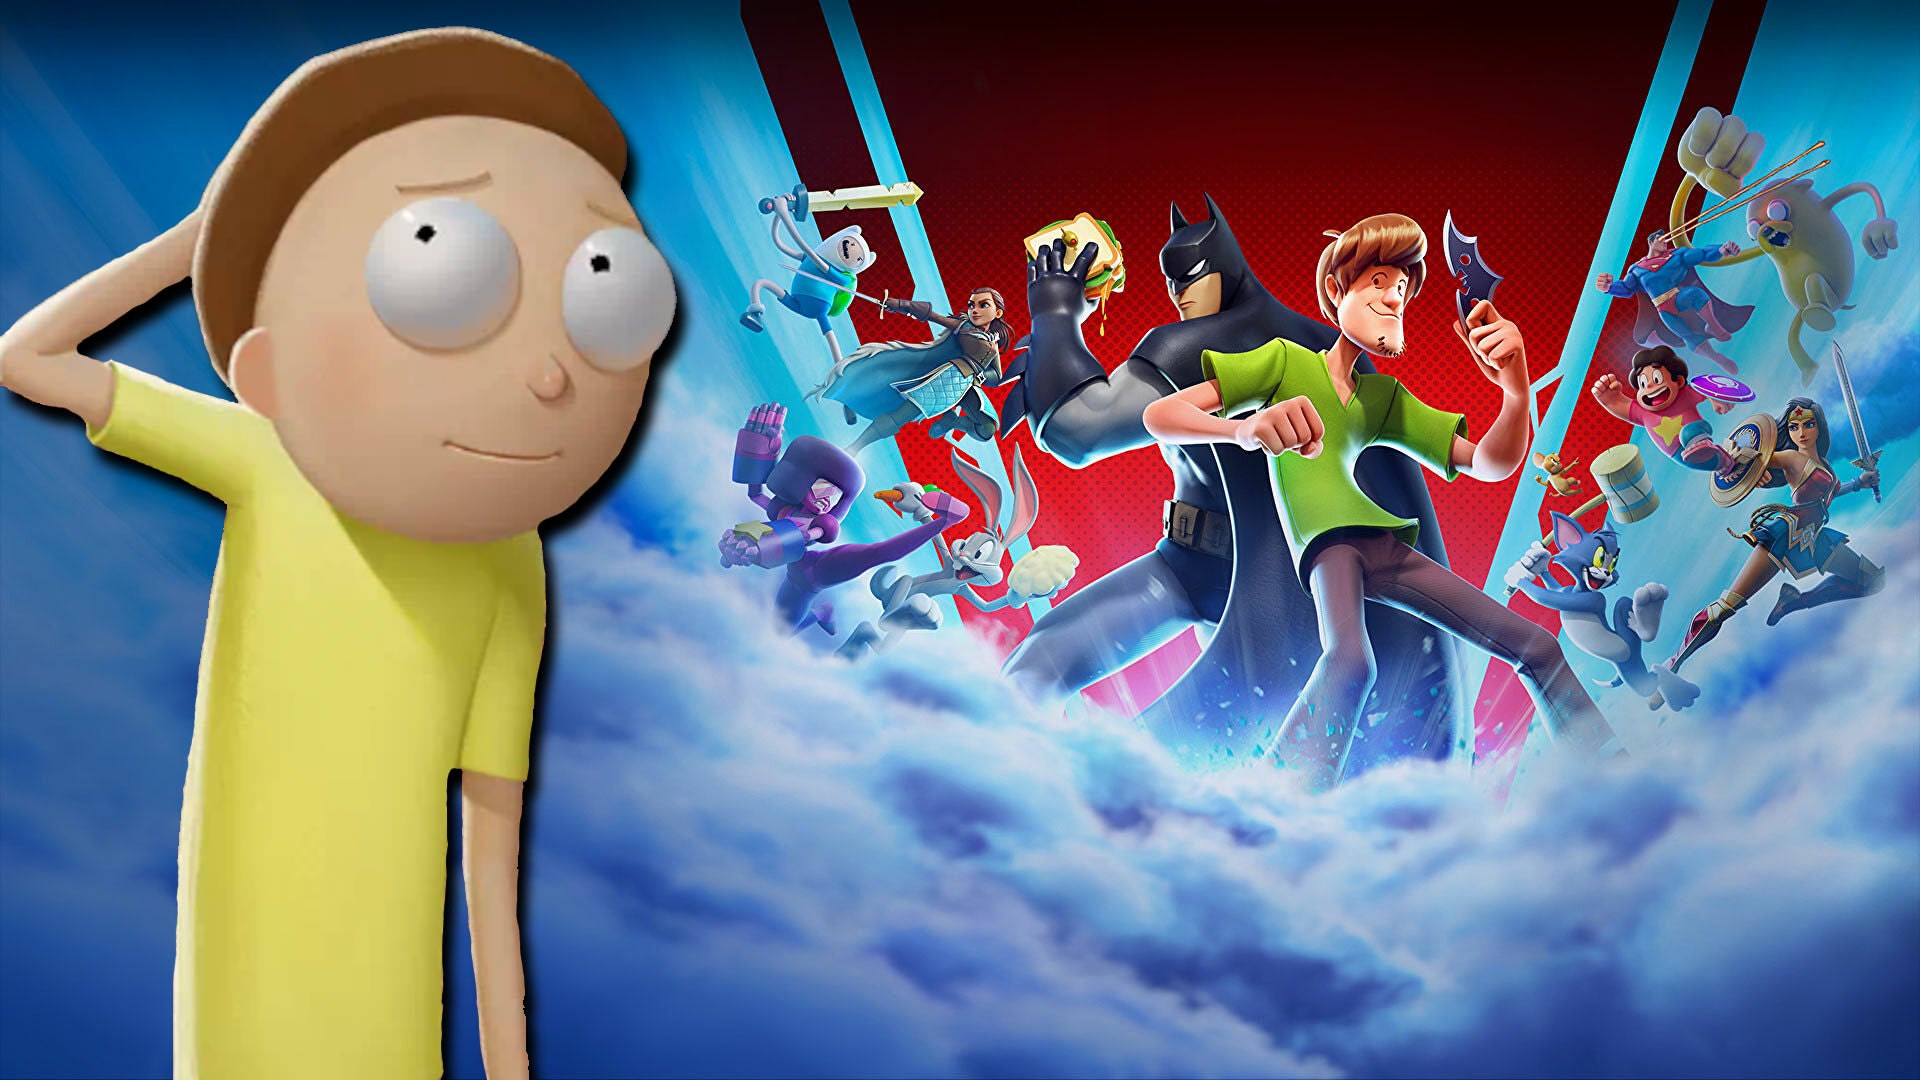 Image for MultiVersus Season 1 start date confirmed for next week, Morty coming later